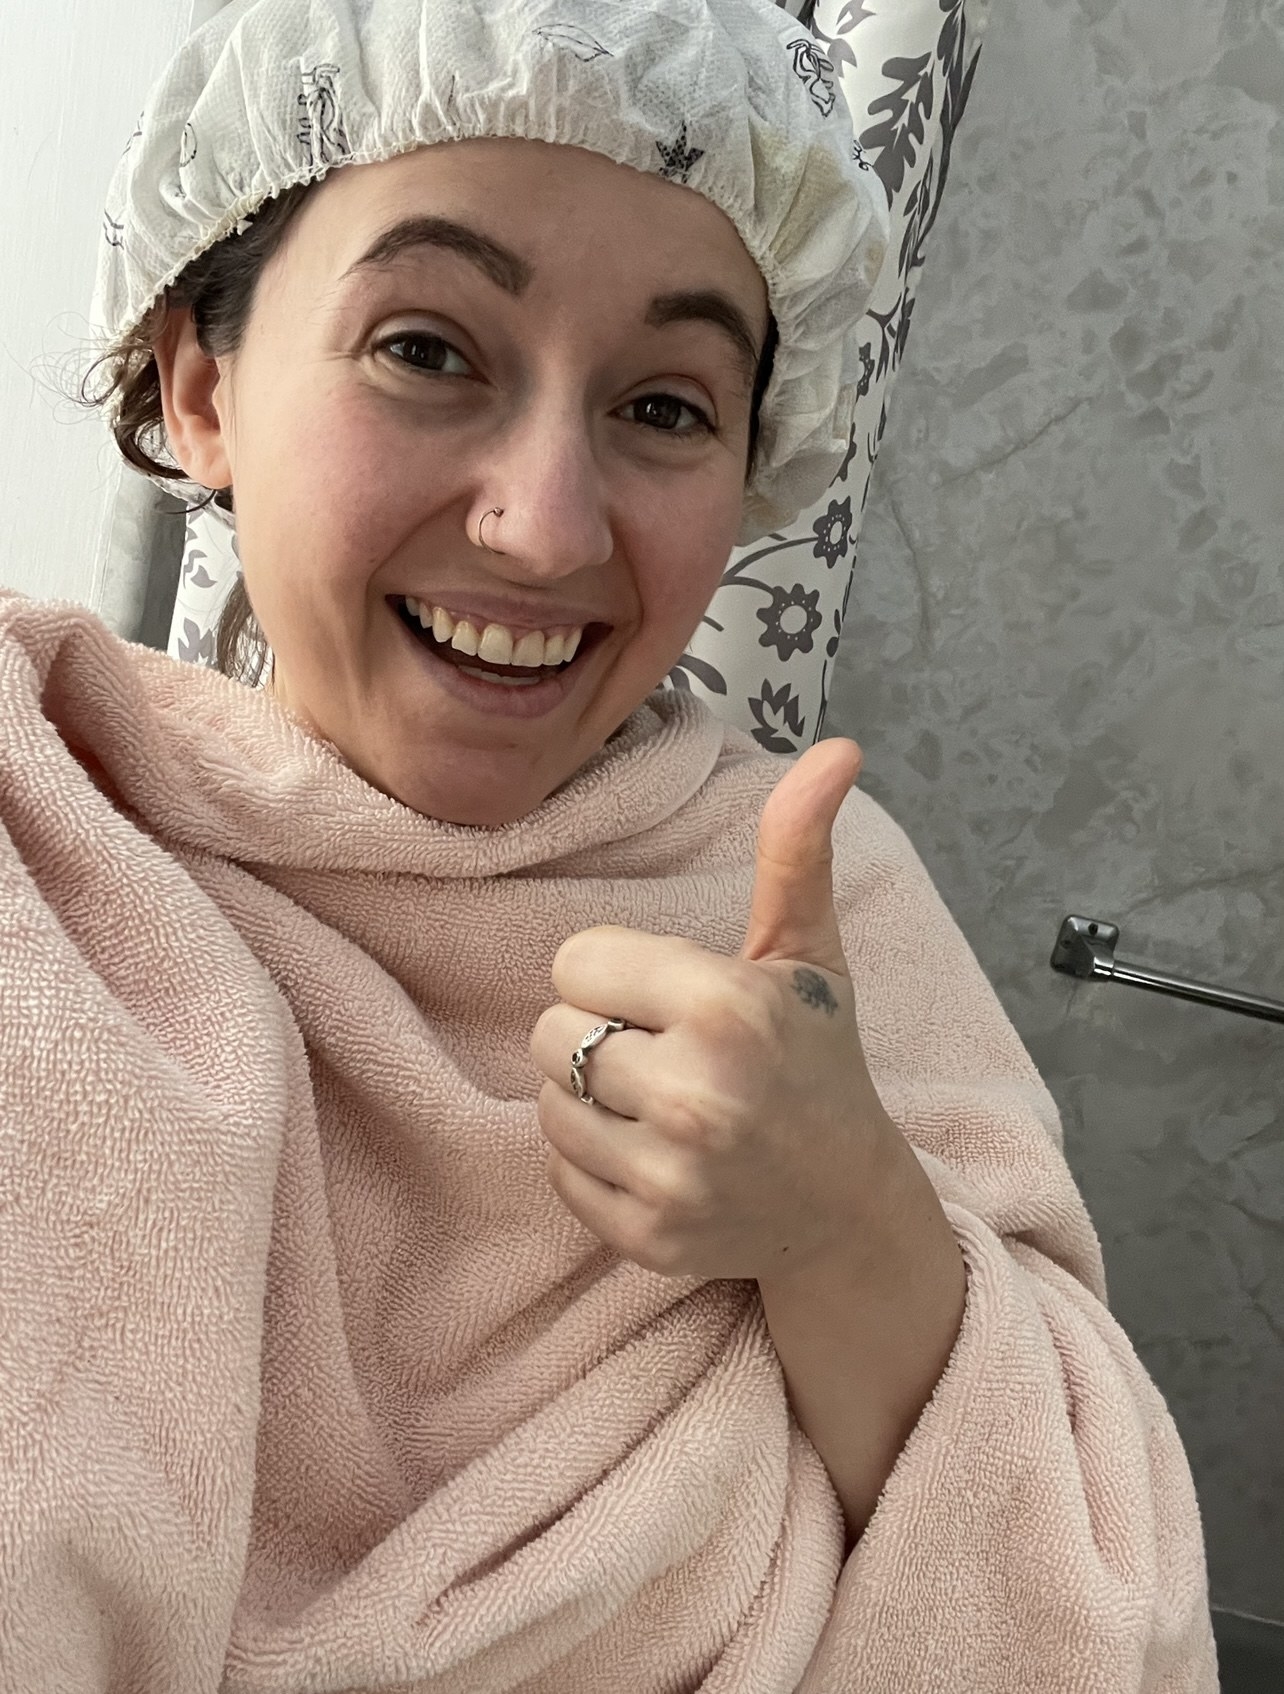 The author giving a thumbs-up after a shower